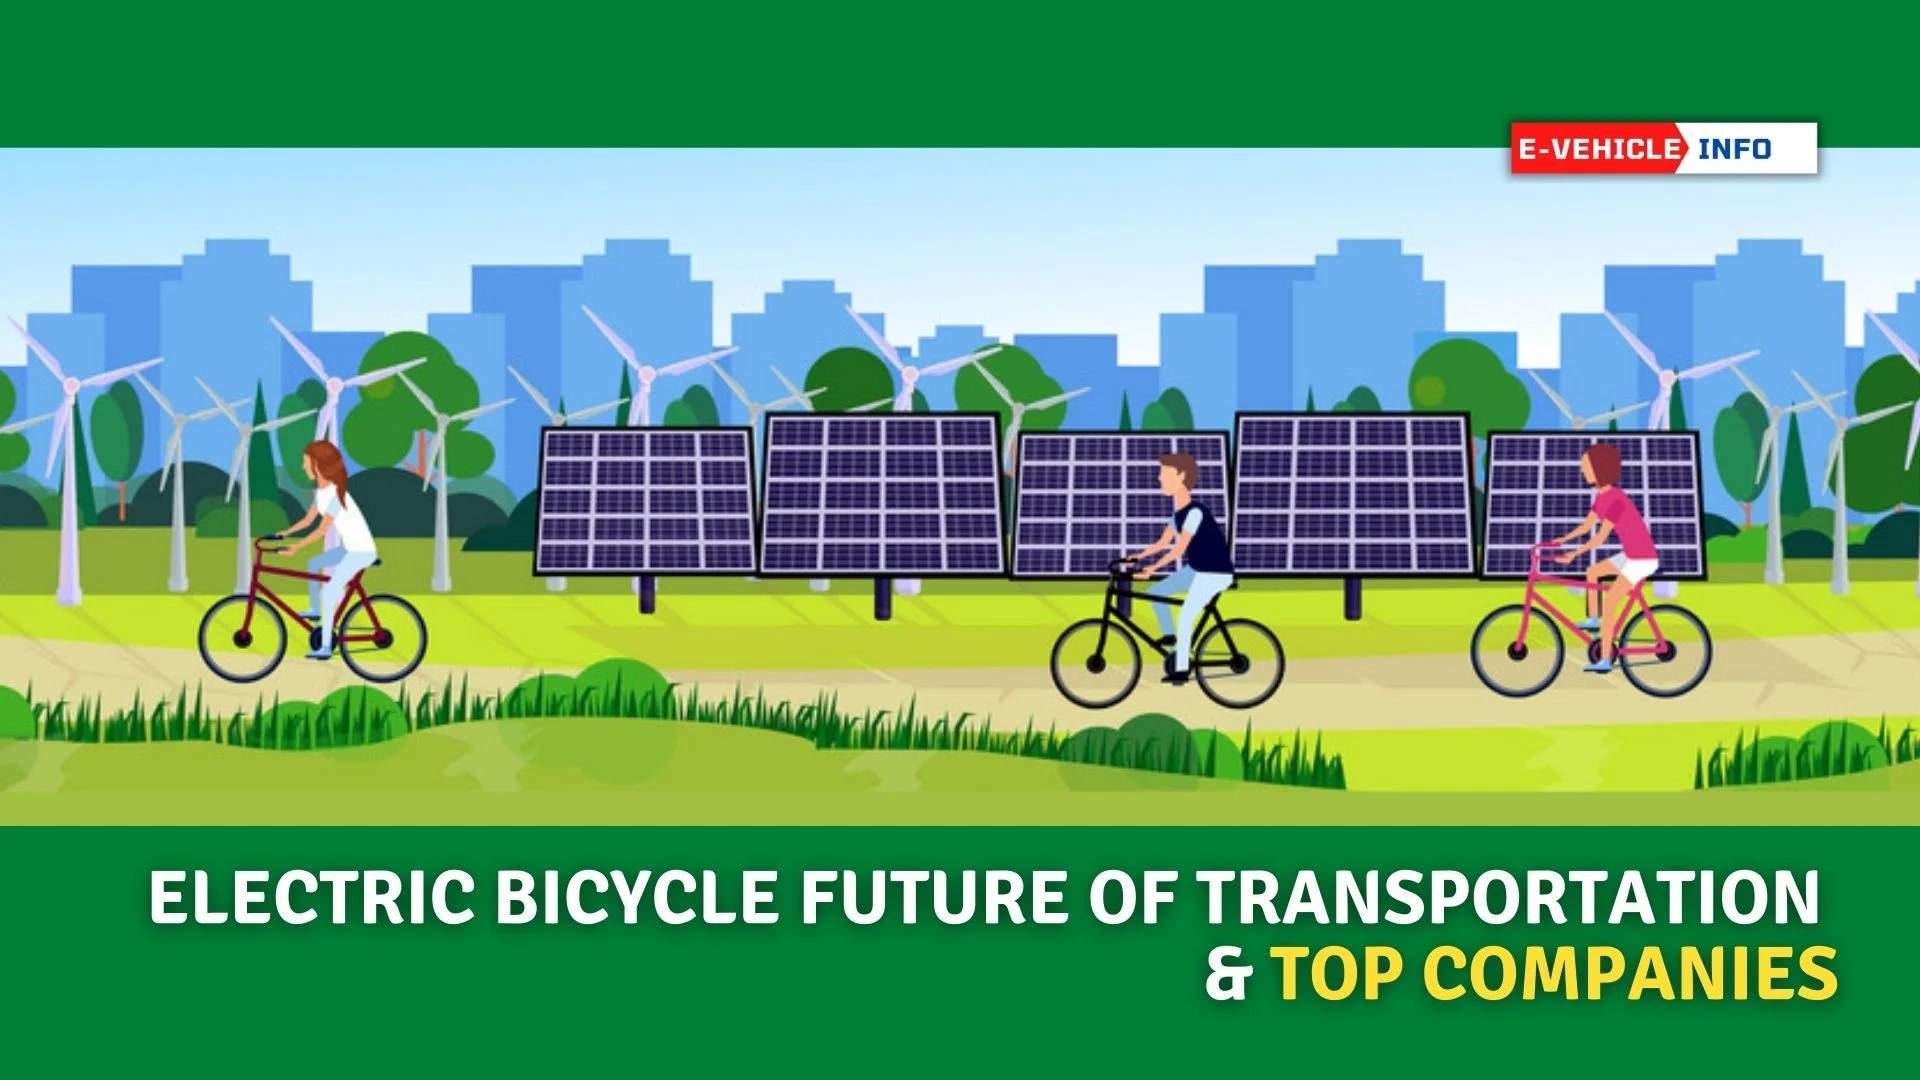 https://e-vehicleinfo.com/electric-bicycle-future-of-transportation-top-companies/